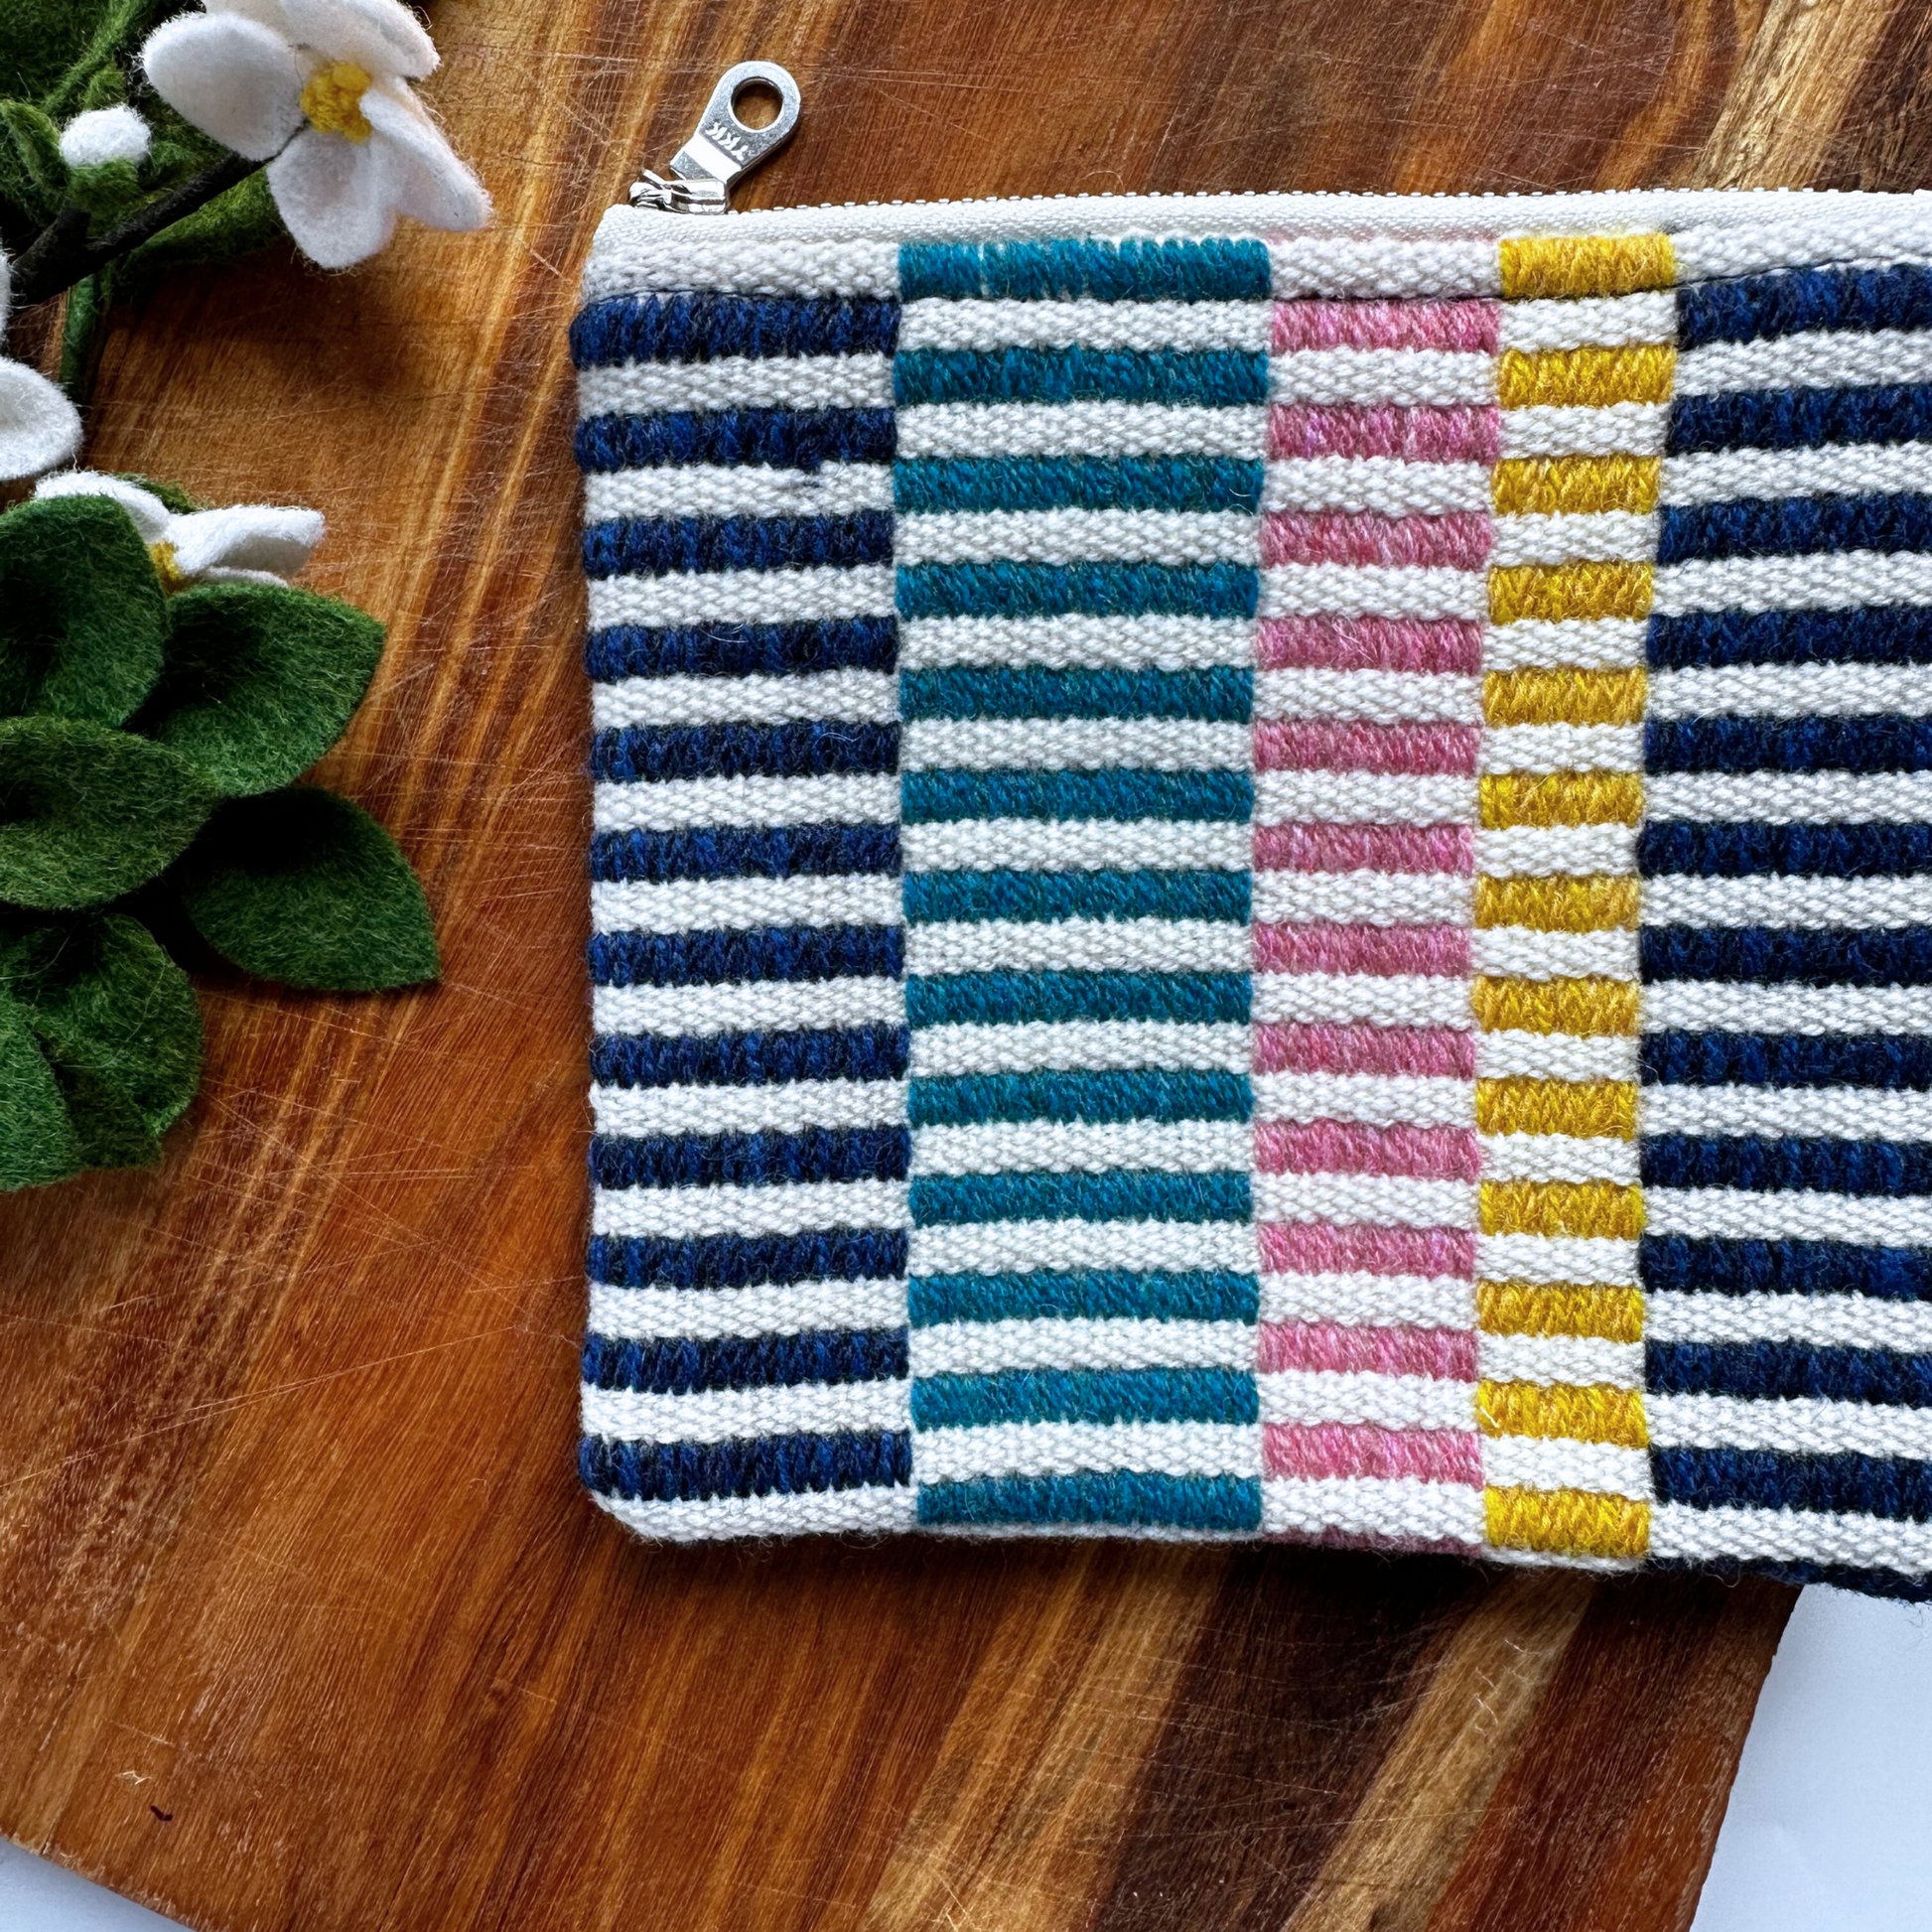 Blue, Yellow, Turquoise and Pink Striped Handwoven Zipper Purse